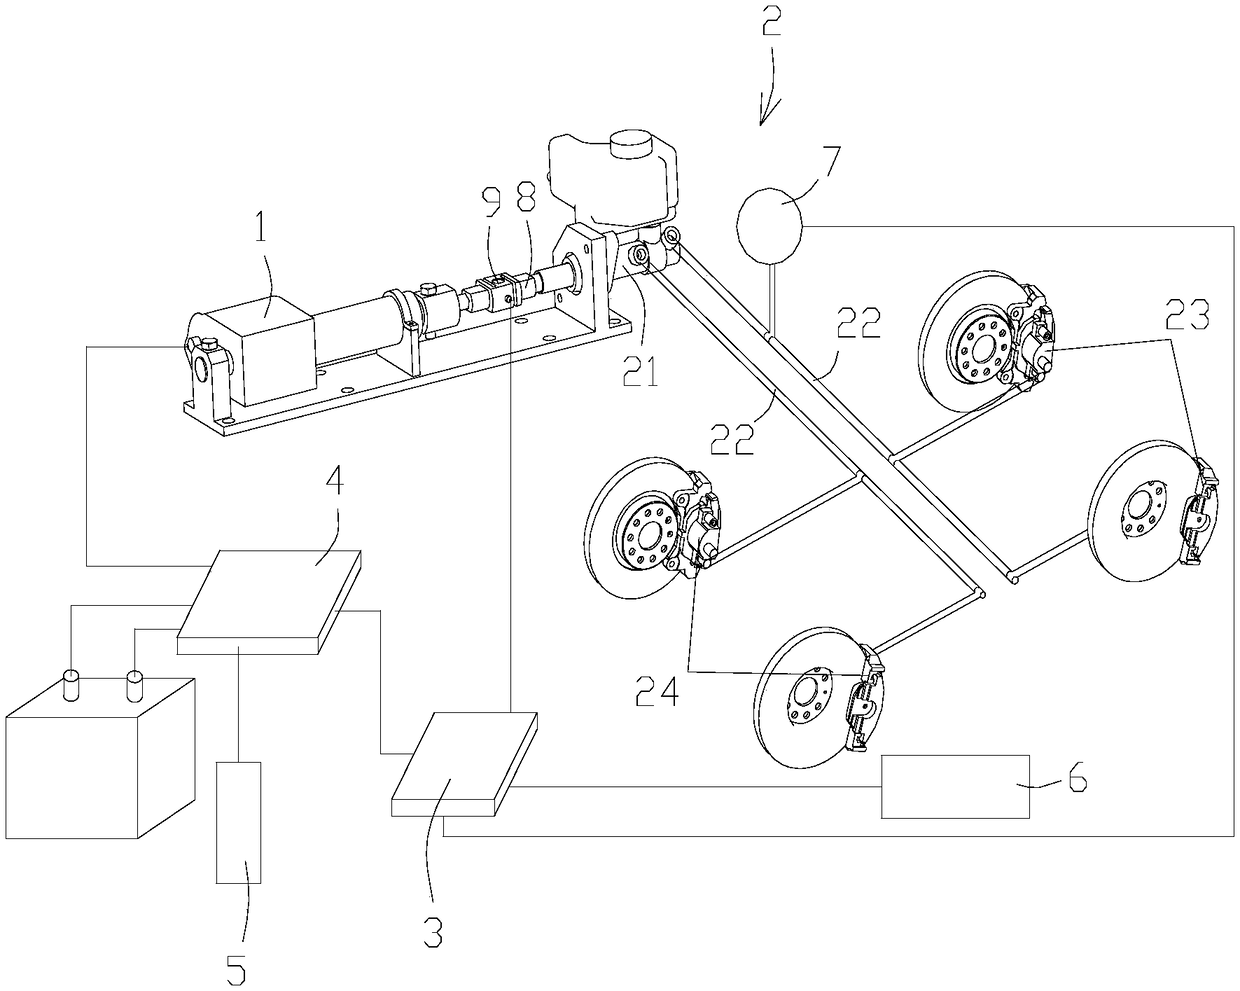 Brake control system and method for an unmanned vehicle